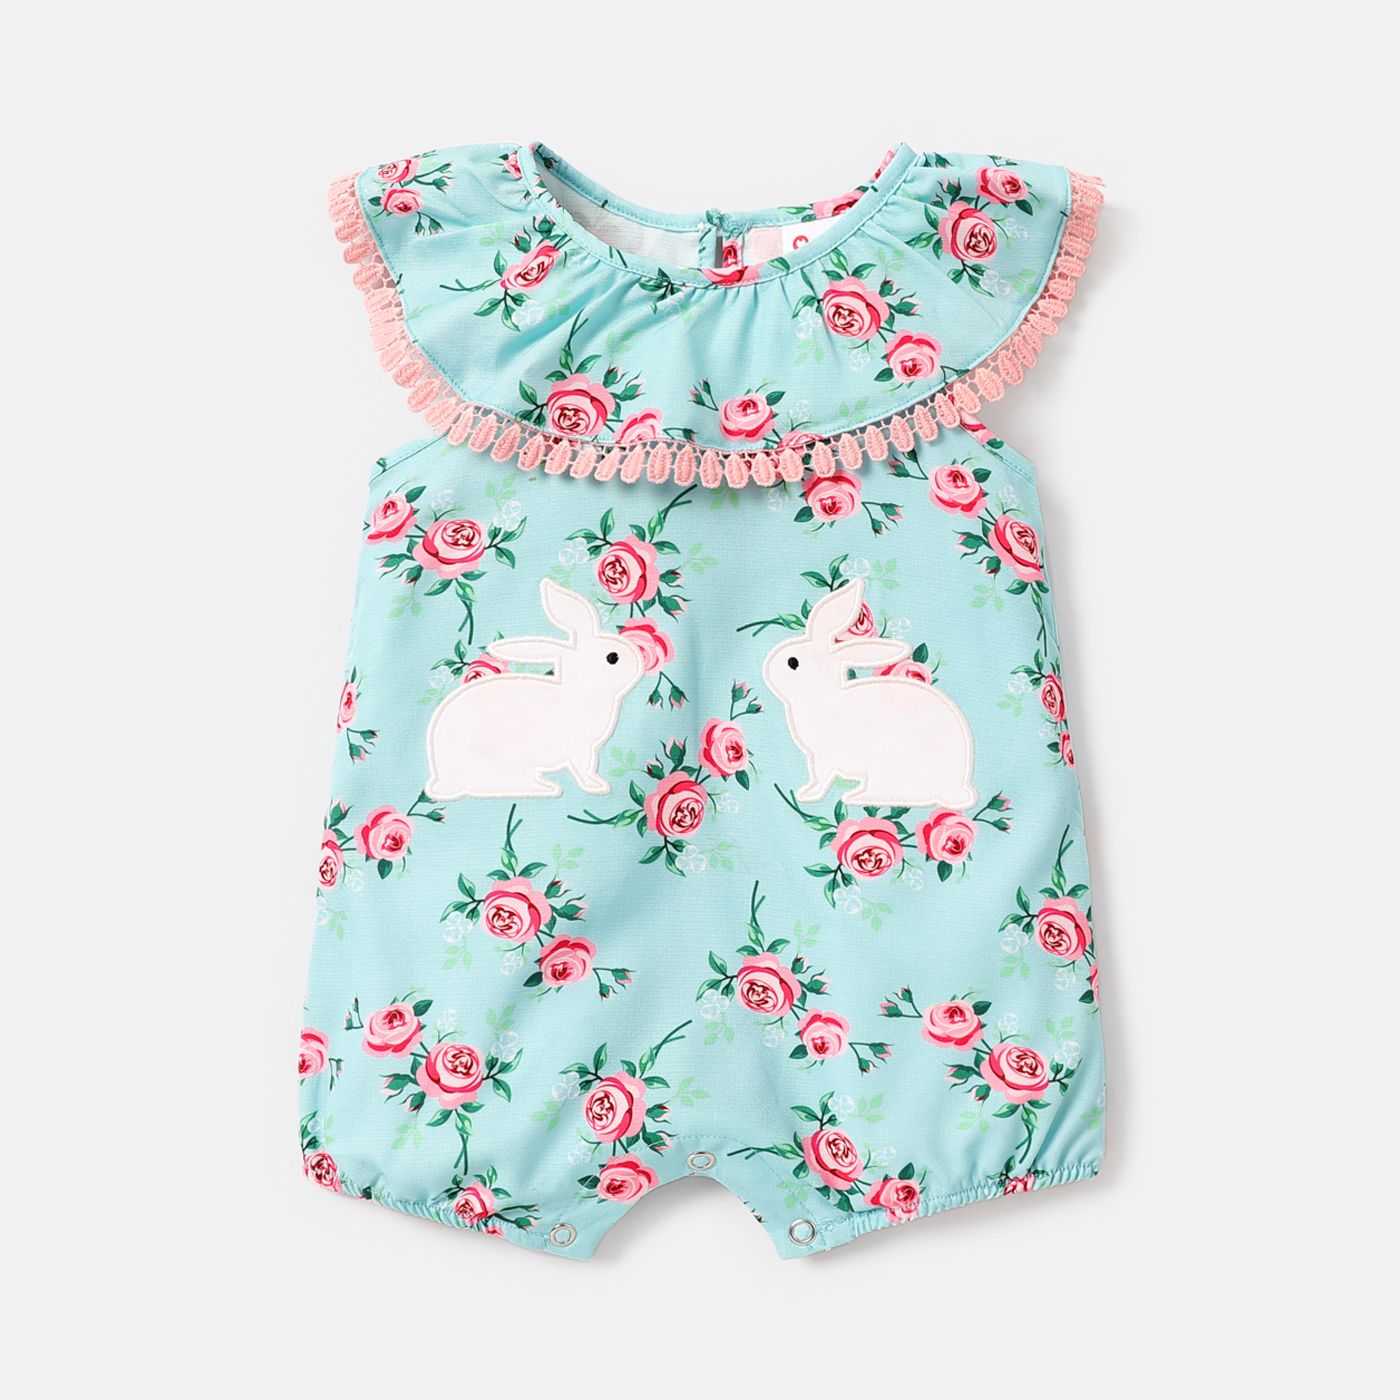 Baby Girl Rabbit Embroidered Allover Floral Print Ruffle Collar Sleeveless Romper